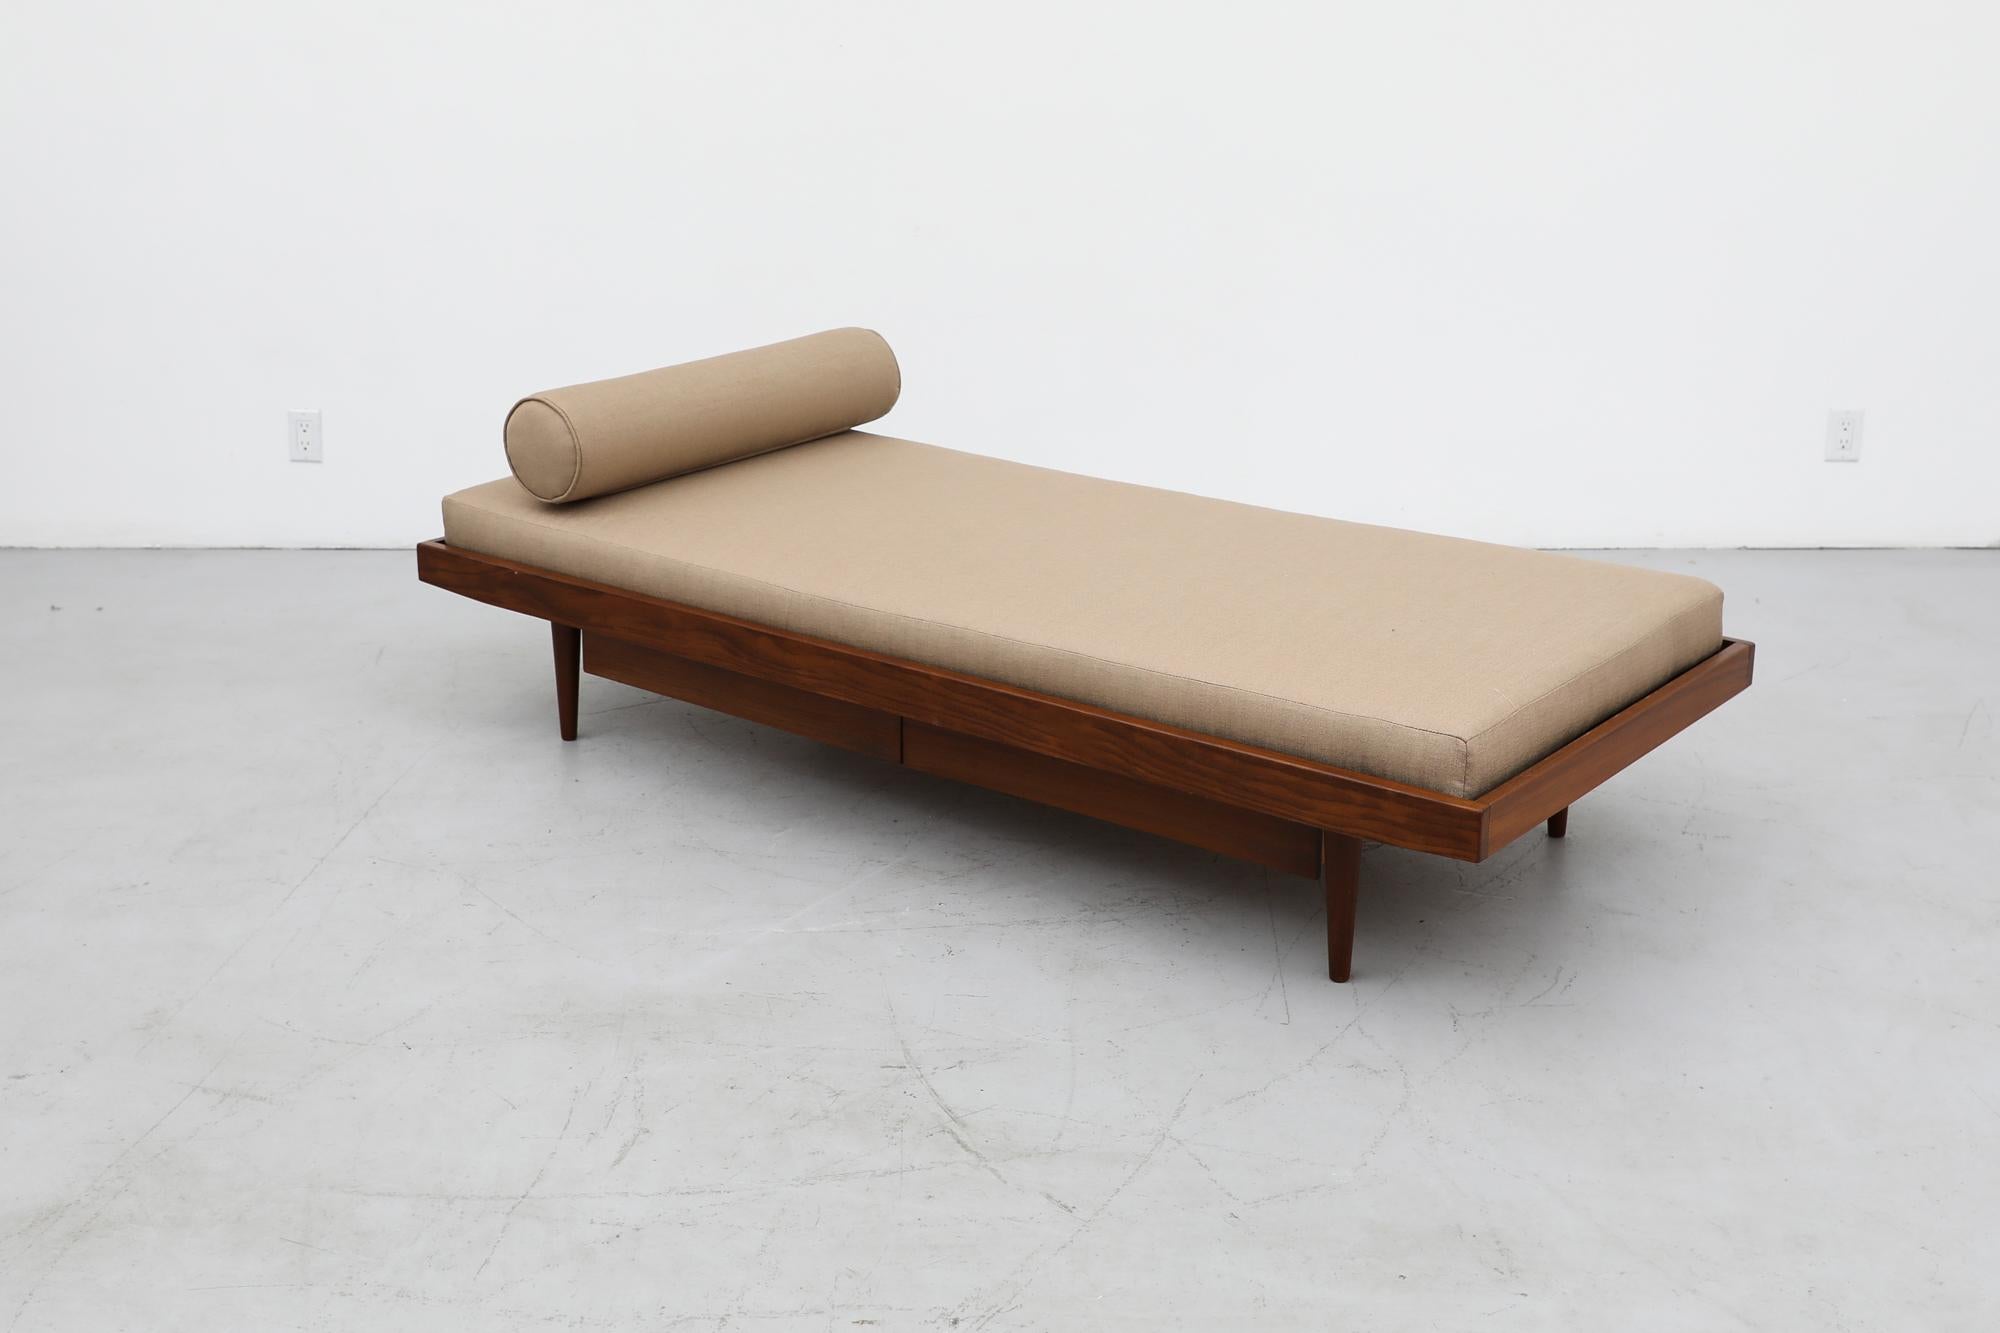 Mid-20th Century Midcentury Pierre Chapo Inspired Teak Daybed with Storage Drawers